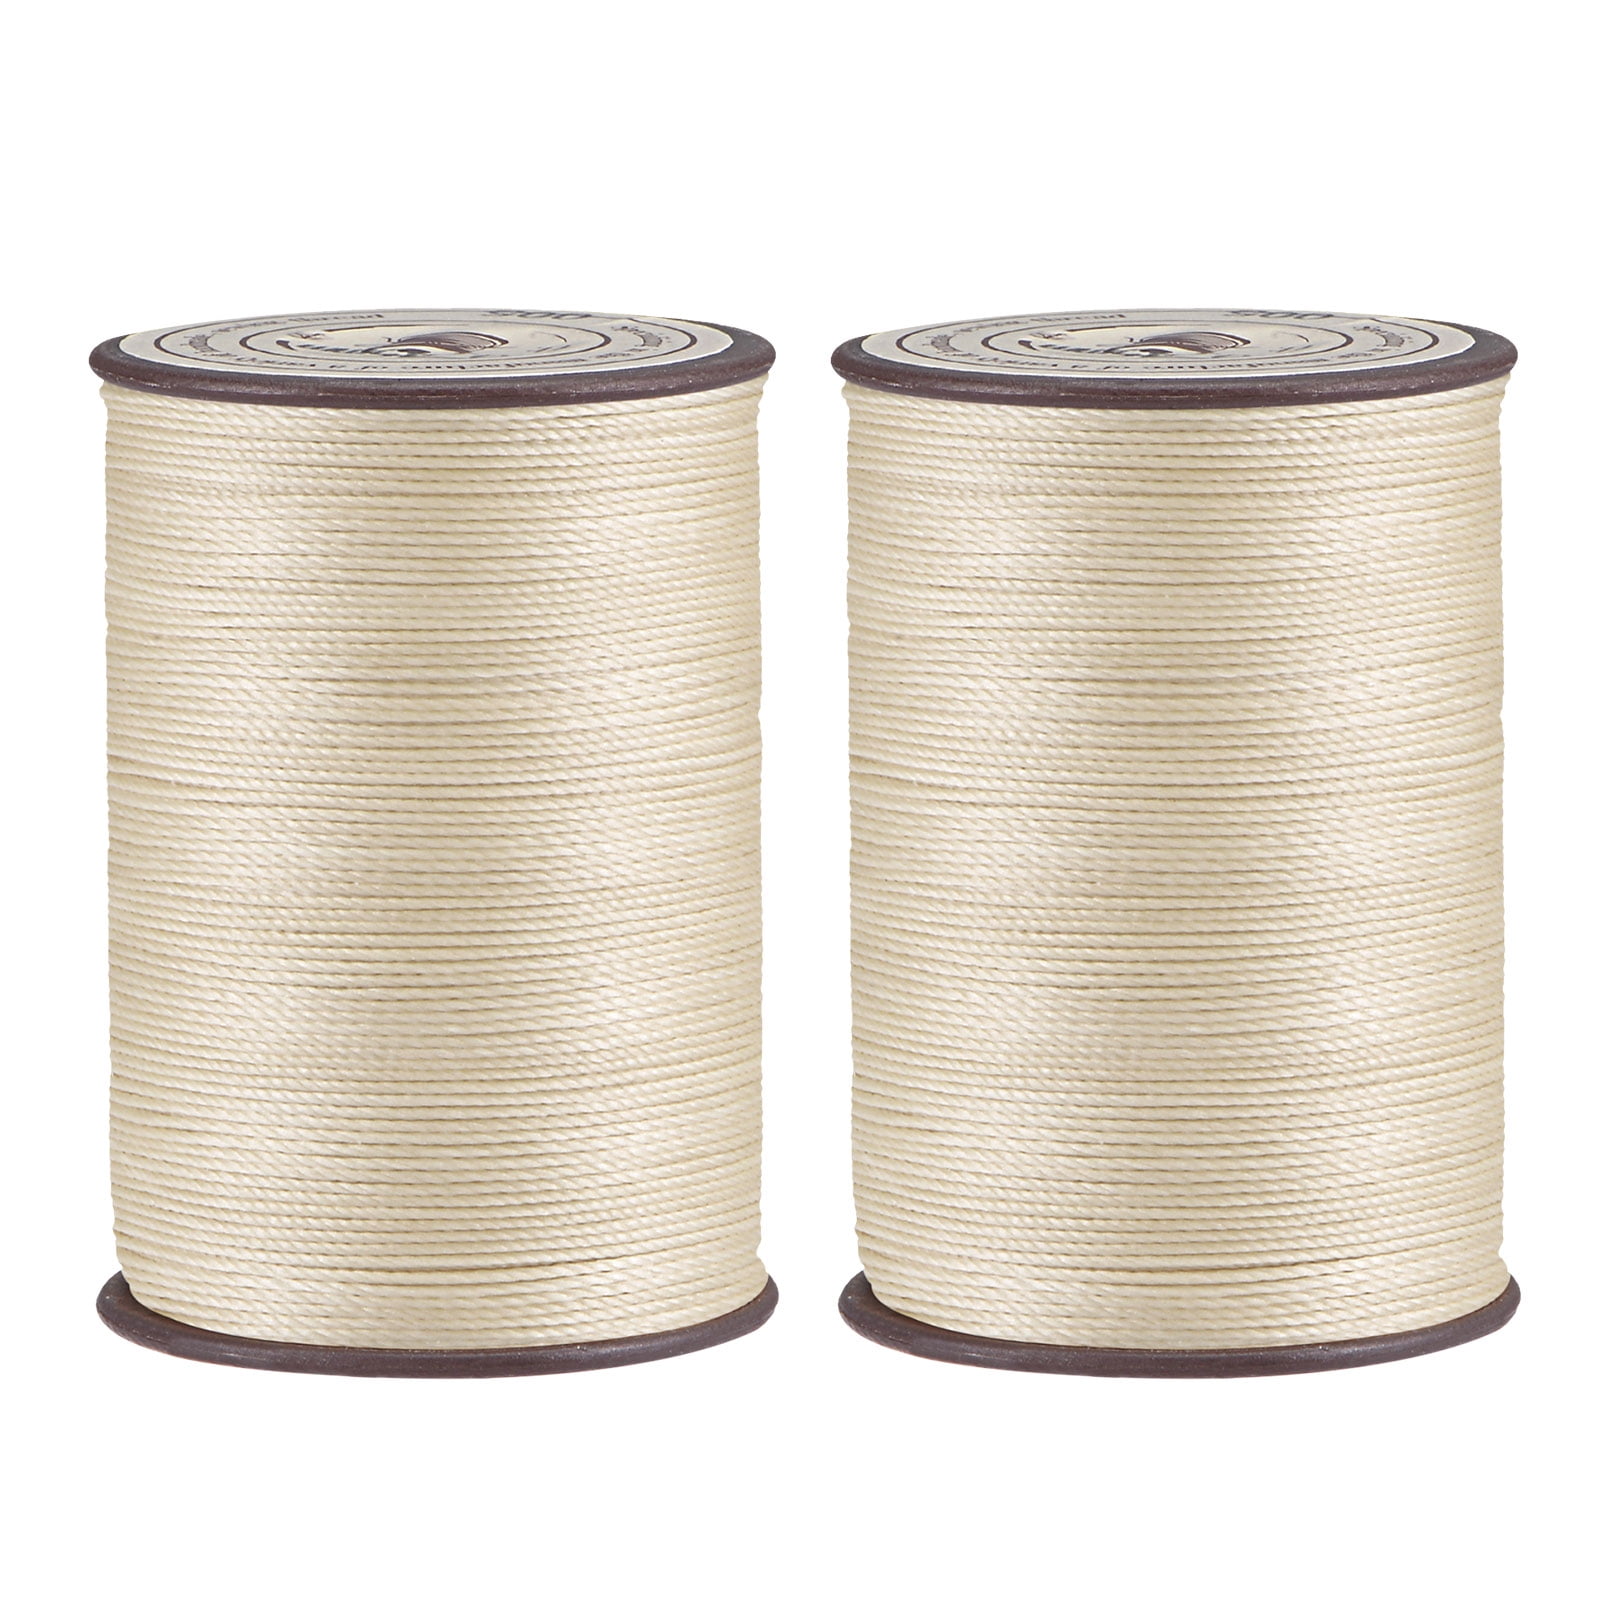 2 Pack Thin Waxed Thread 137 Yards 0.55mm Polyester String Cord